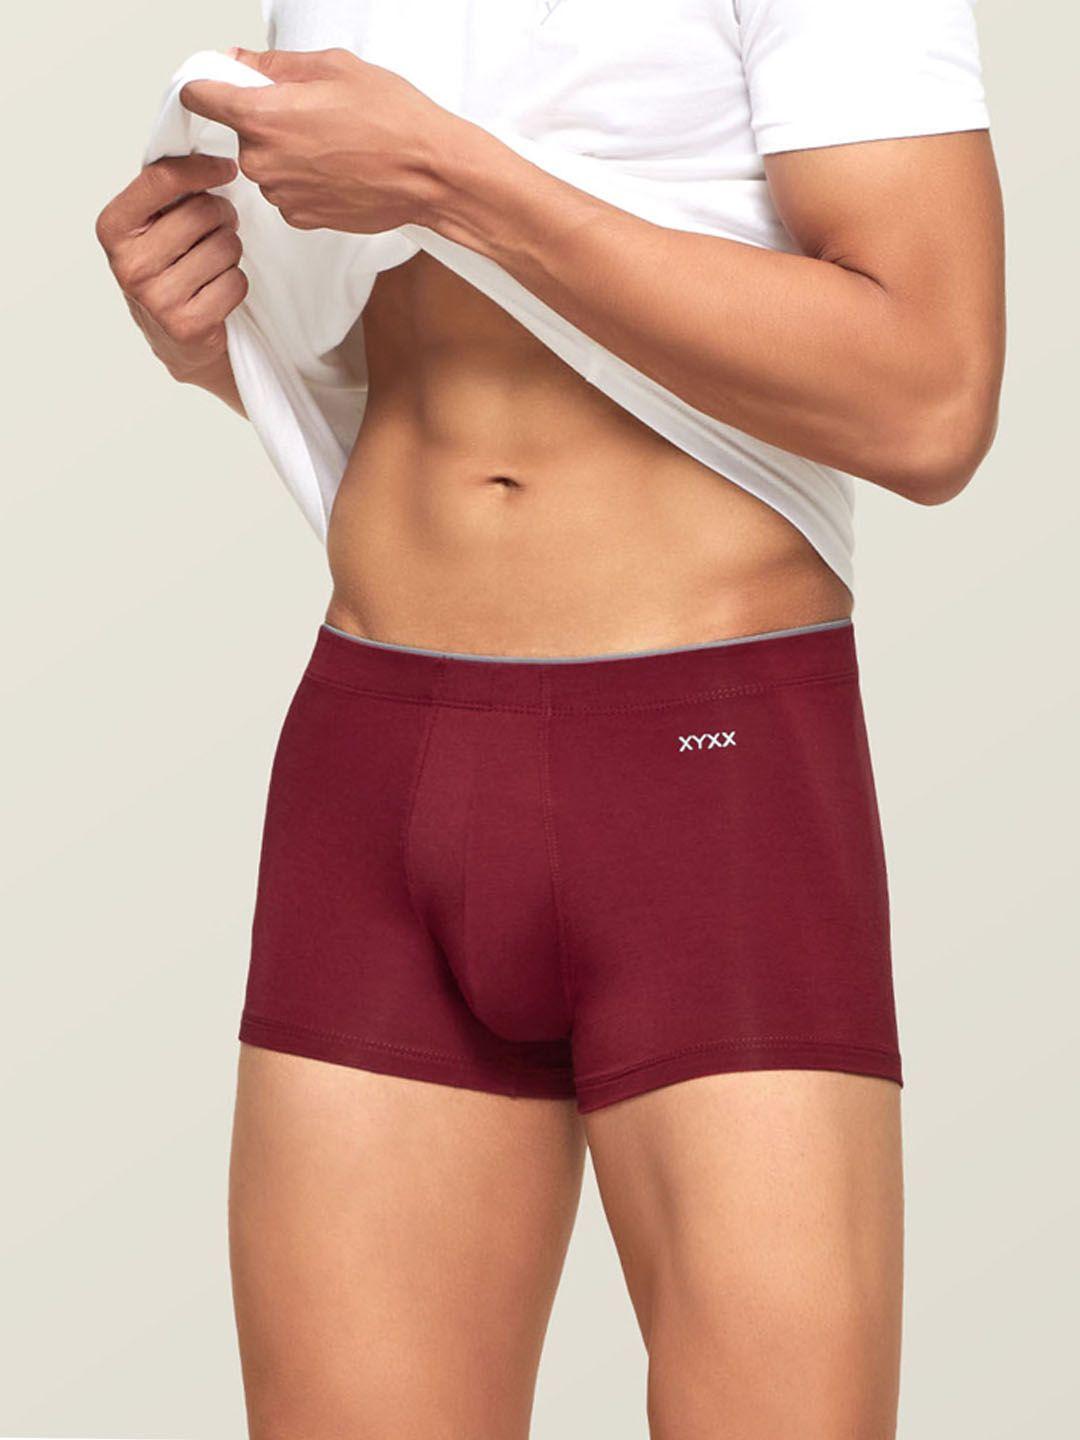 xyxx men maroon solid antimicrobial trunk